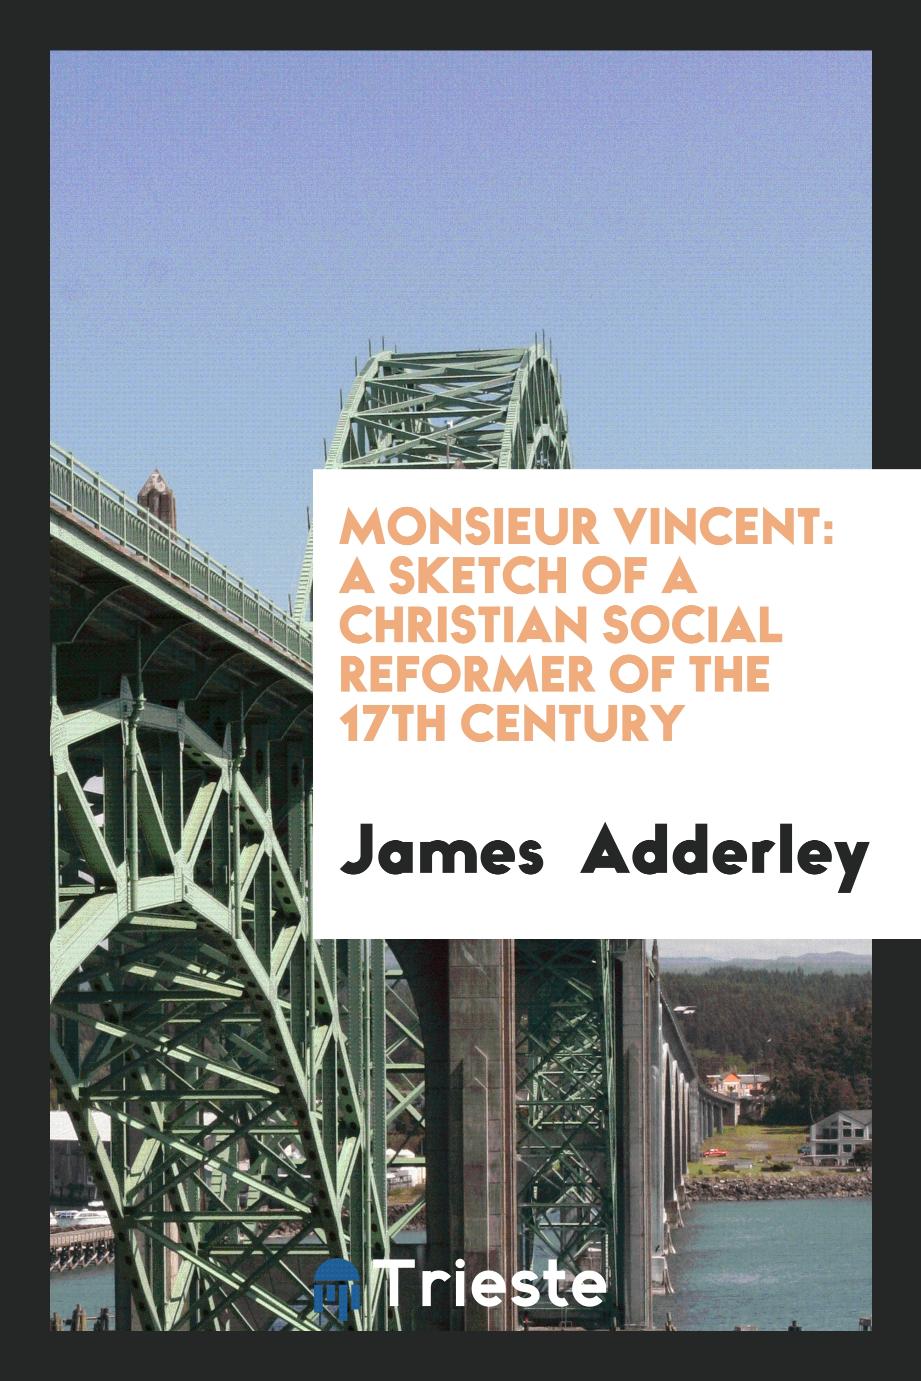 Monsieur Vincent: A Sketch of a Christian Social Reformer of the 17th Century